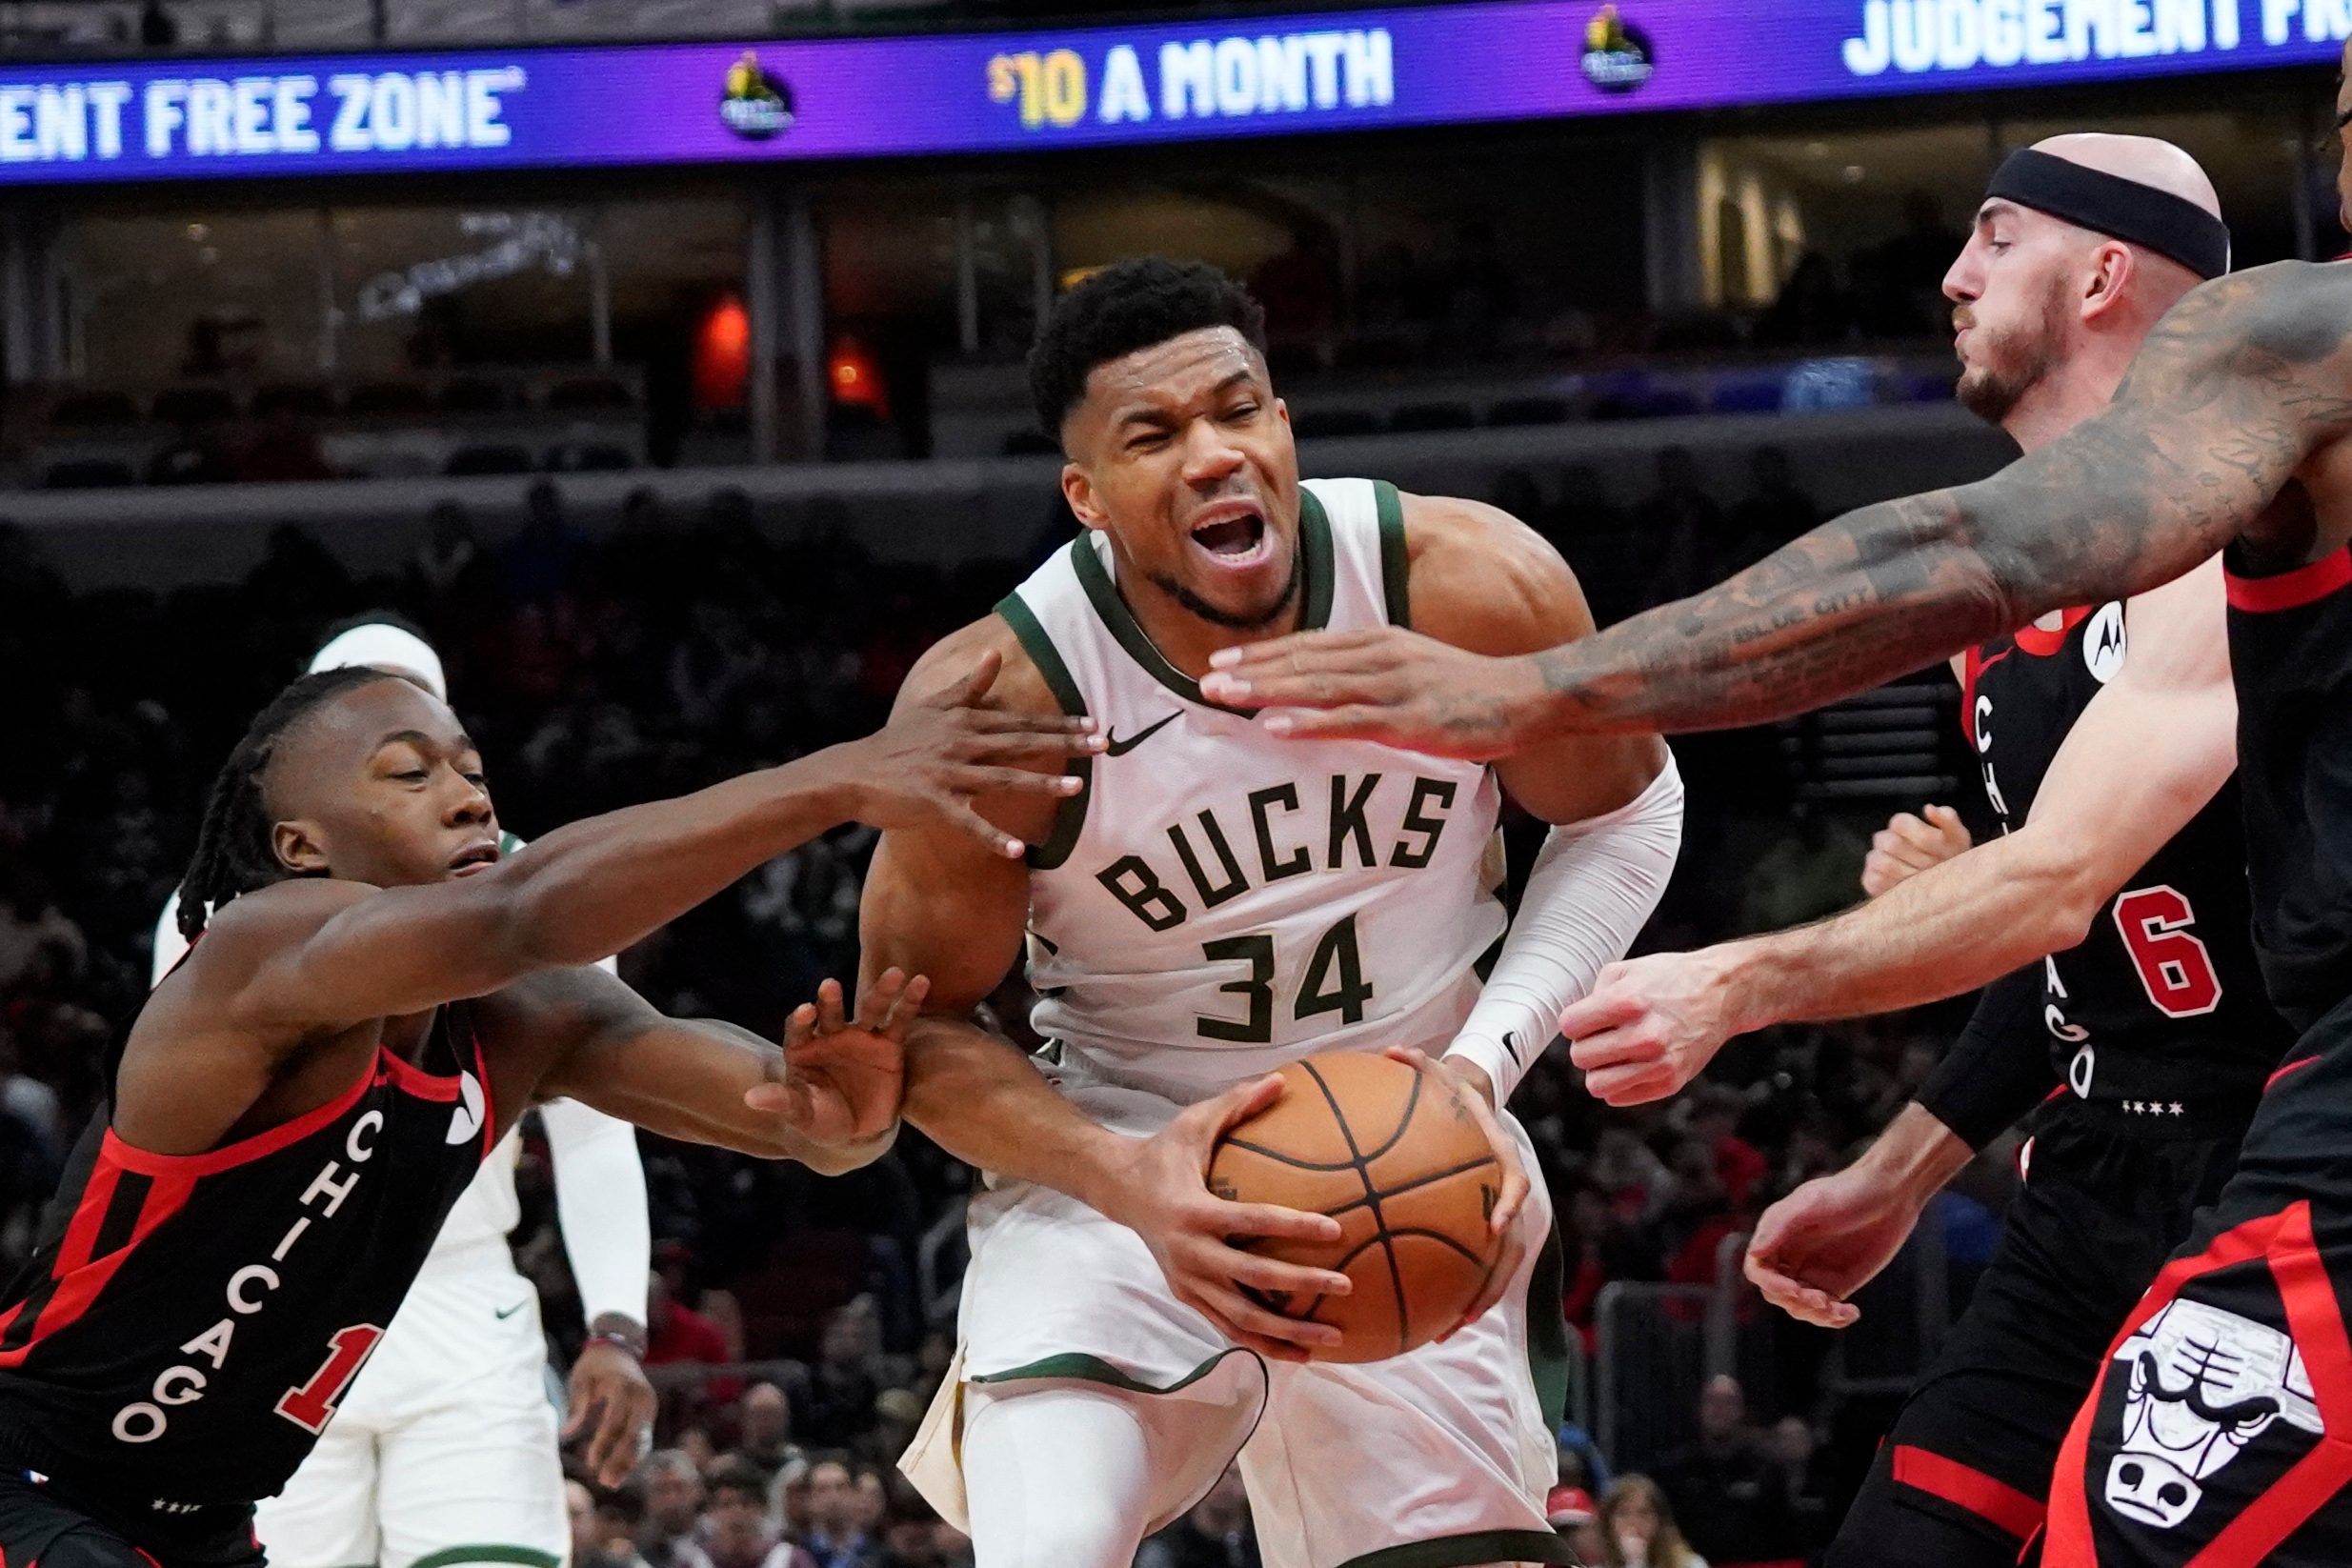 Monster game: Giannis drops 46-point double-double in big Bucks win